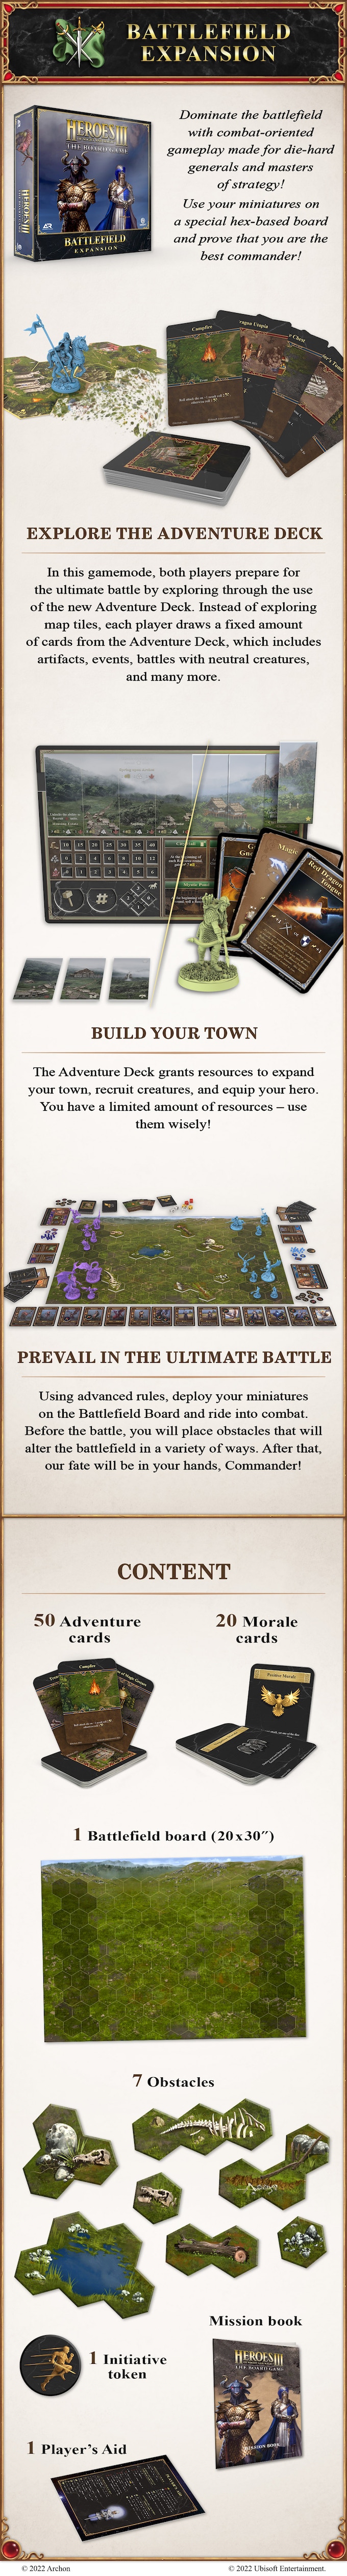 Battlefield Expansion - Heroes Of Might & Magic III The Board Game